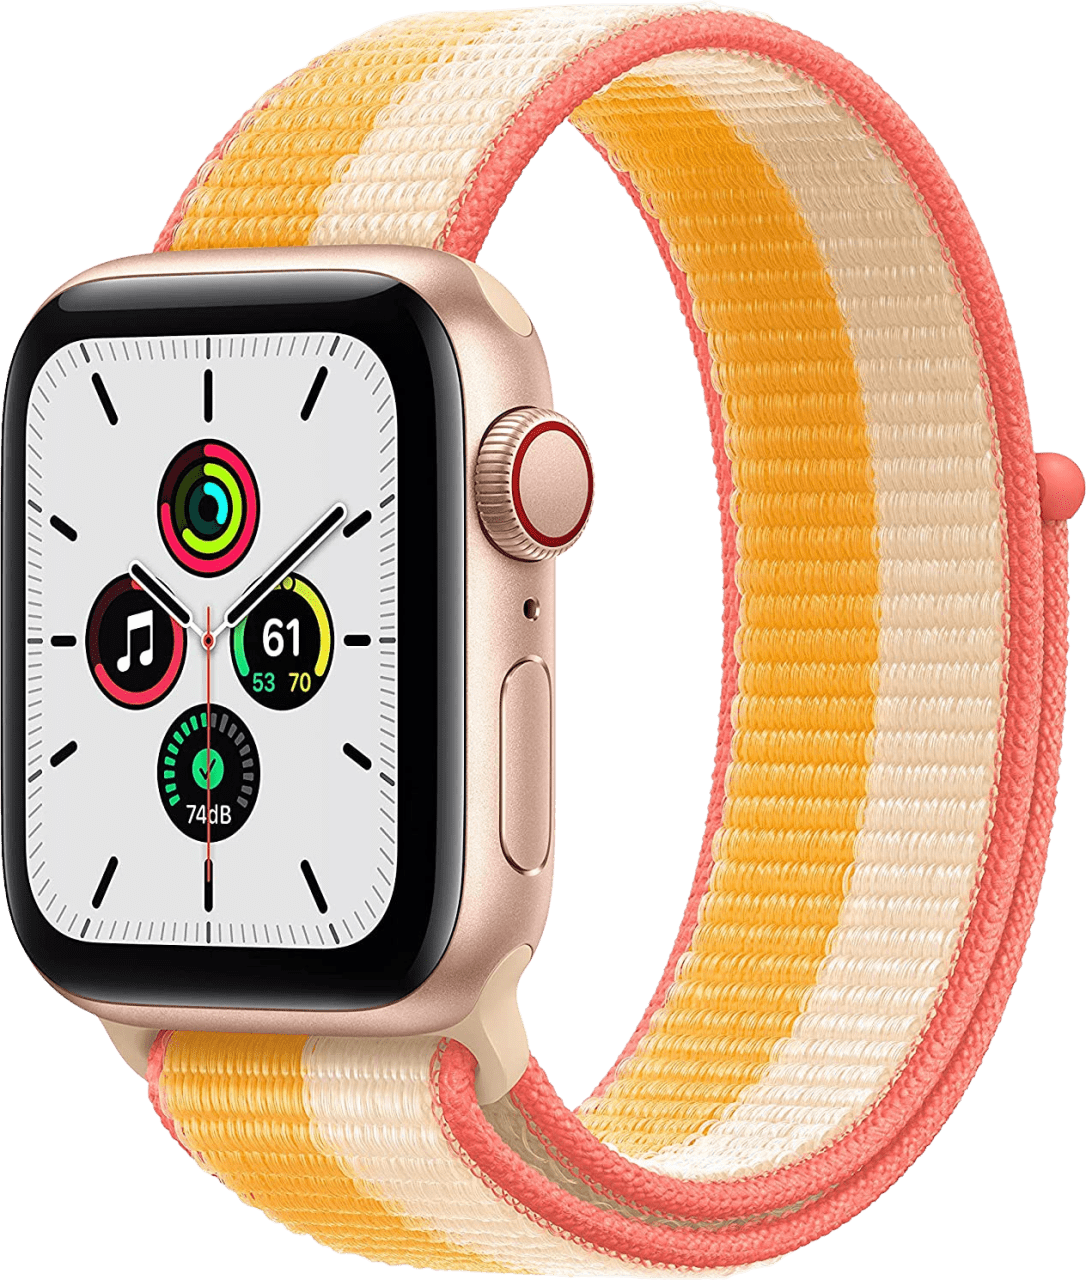 Maize/White Apple Watch SE GPS + Cellular, Gold Aluminium Case and Sport Band, 44mm.1